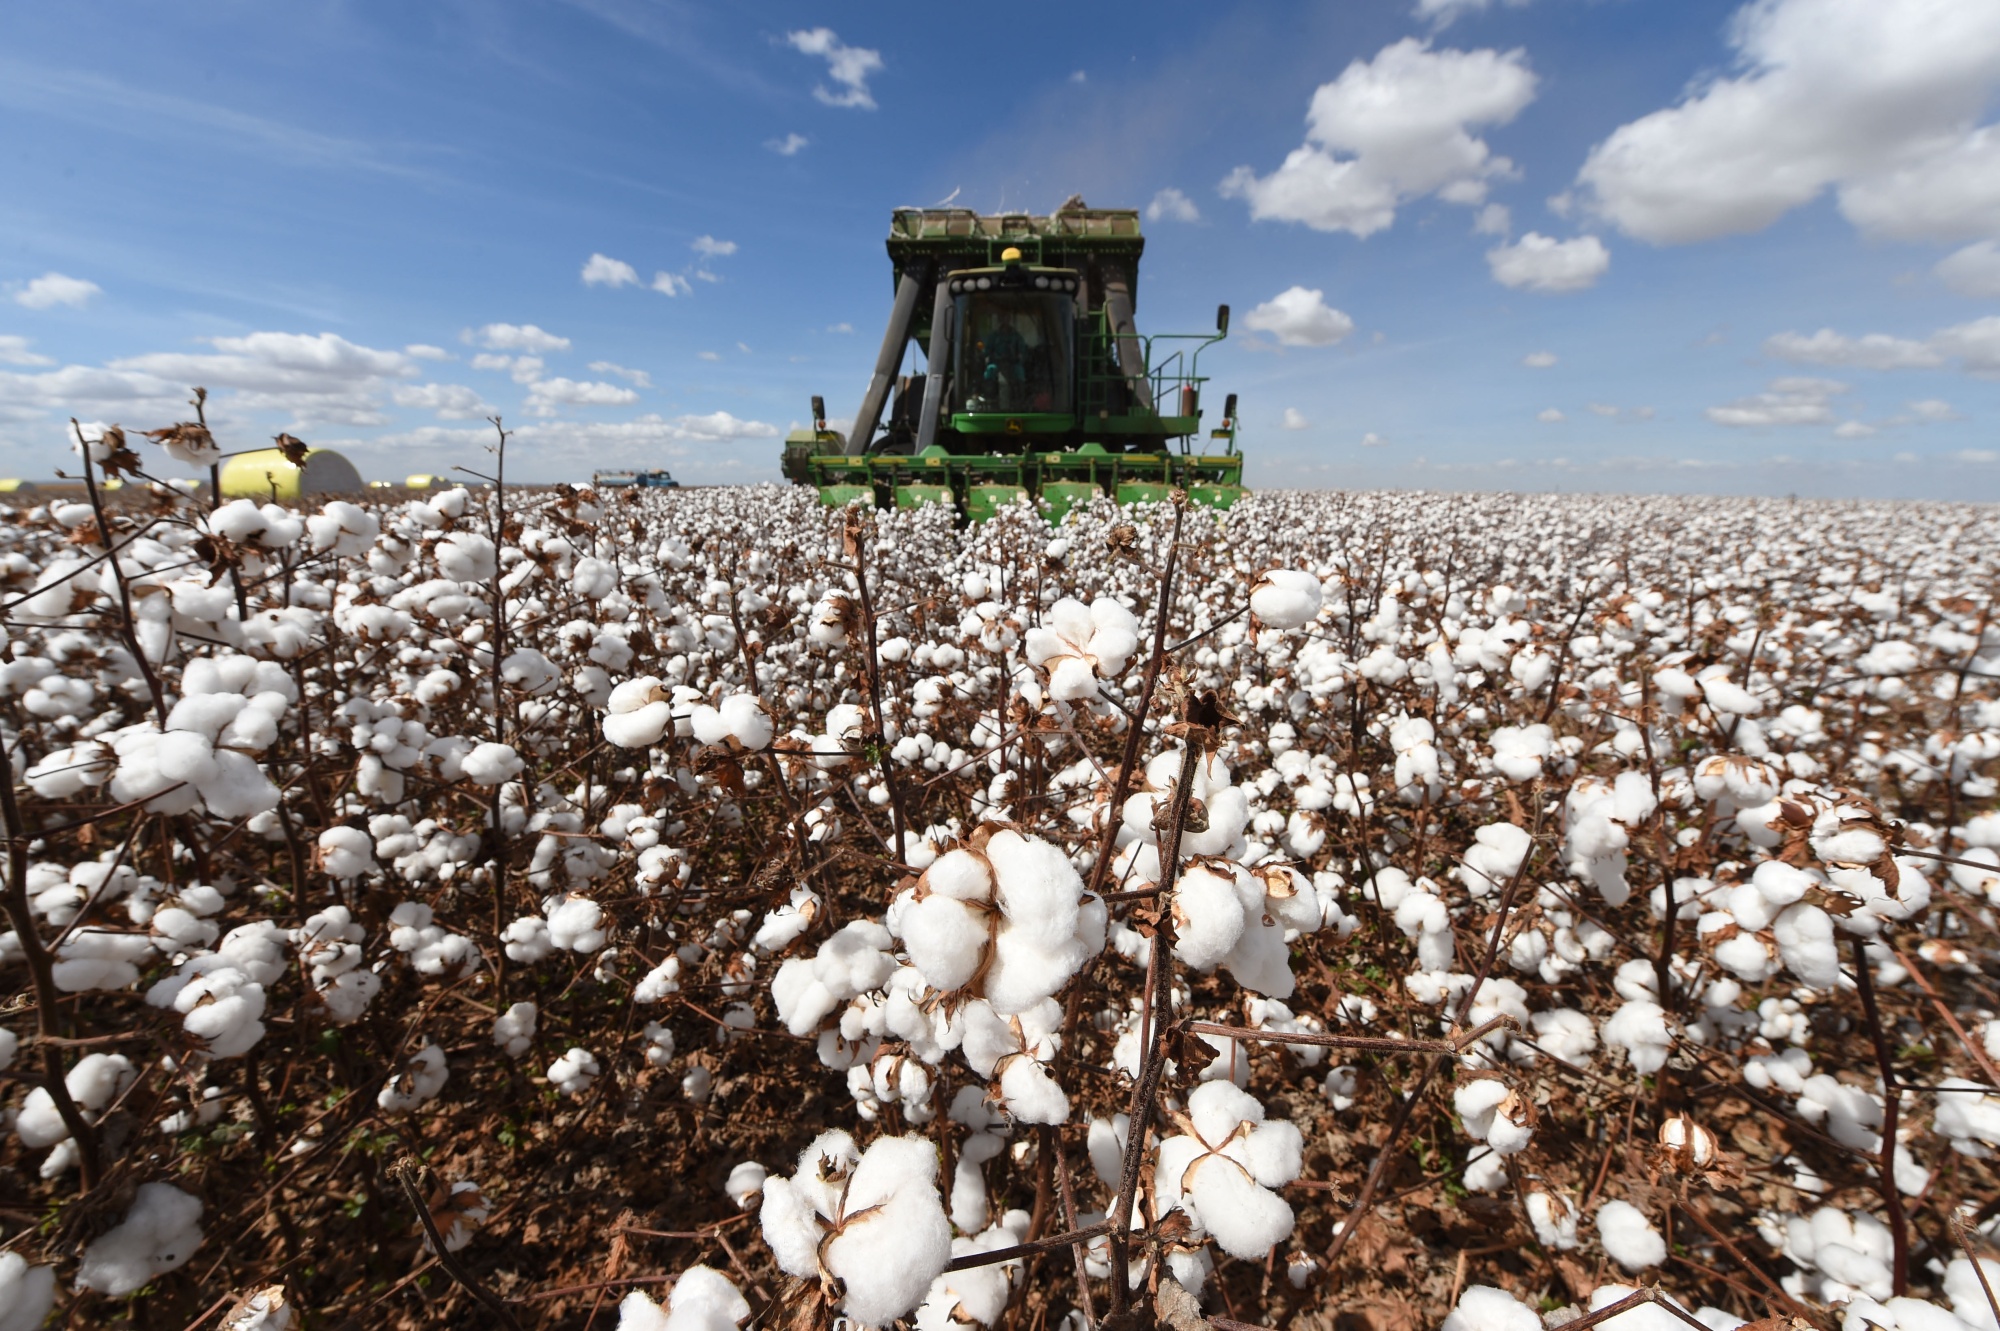 Brazil Inches Closer to Unseating US as Top Cotton Exporter